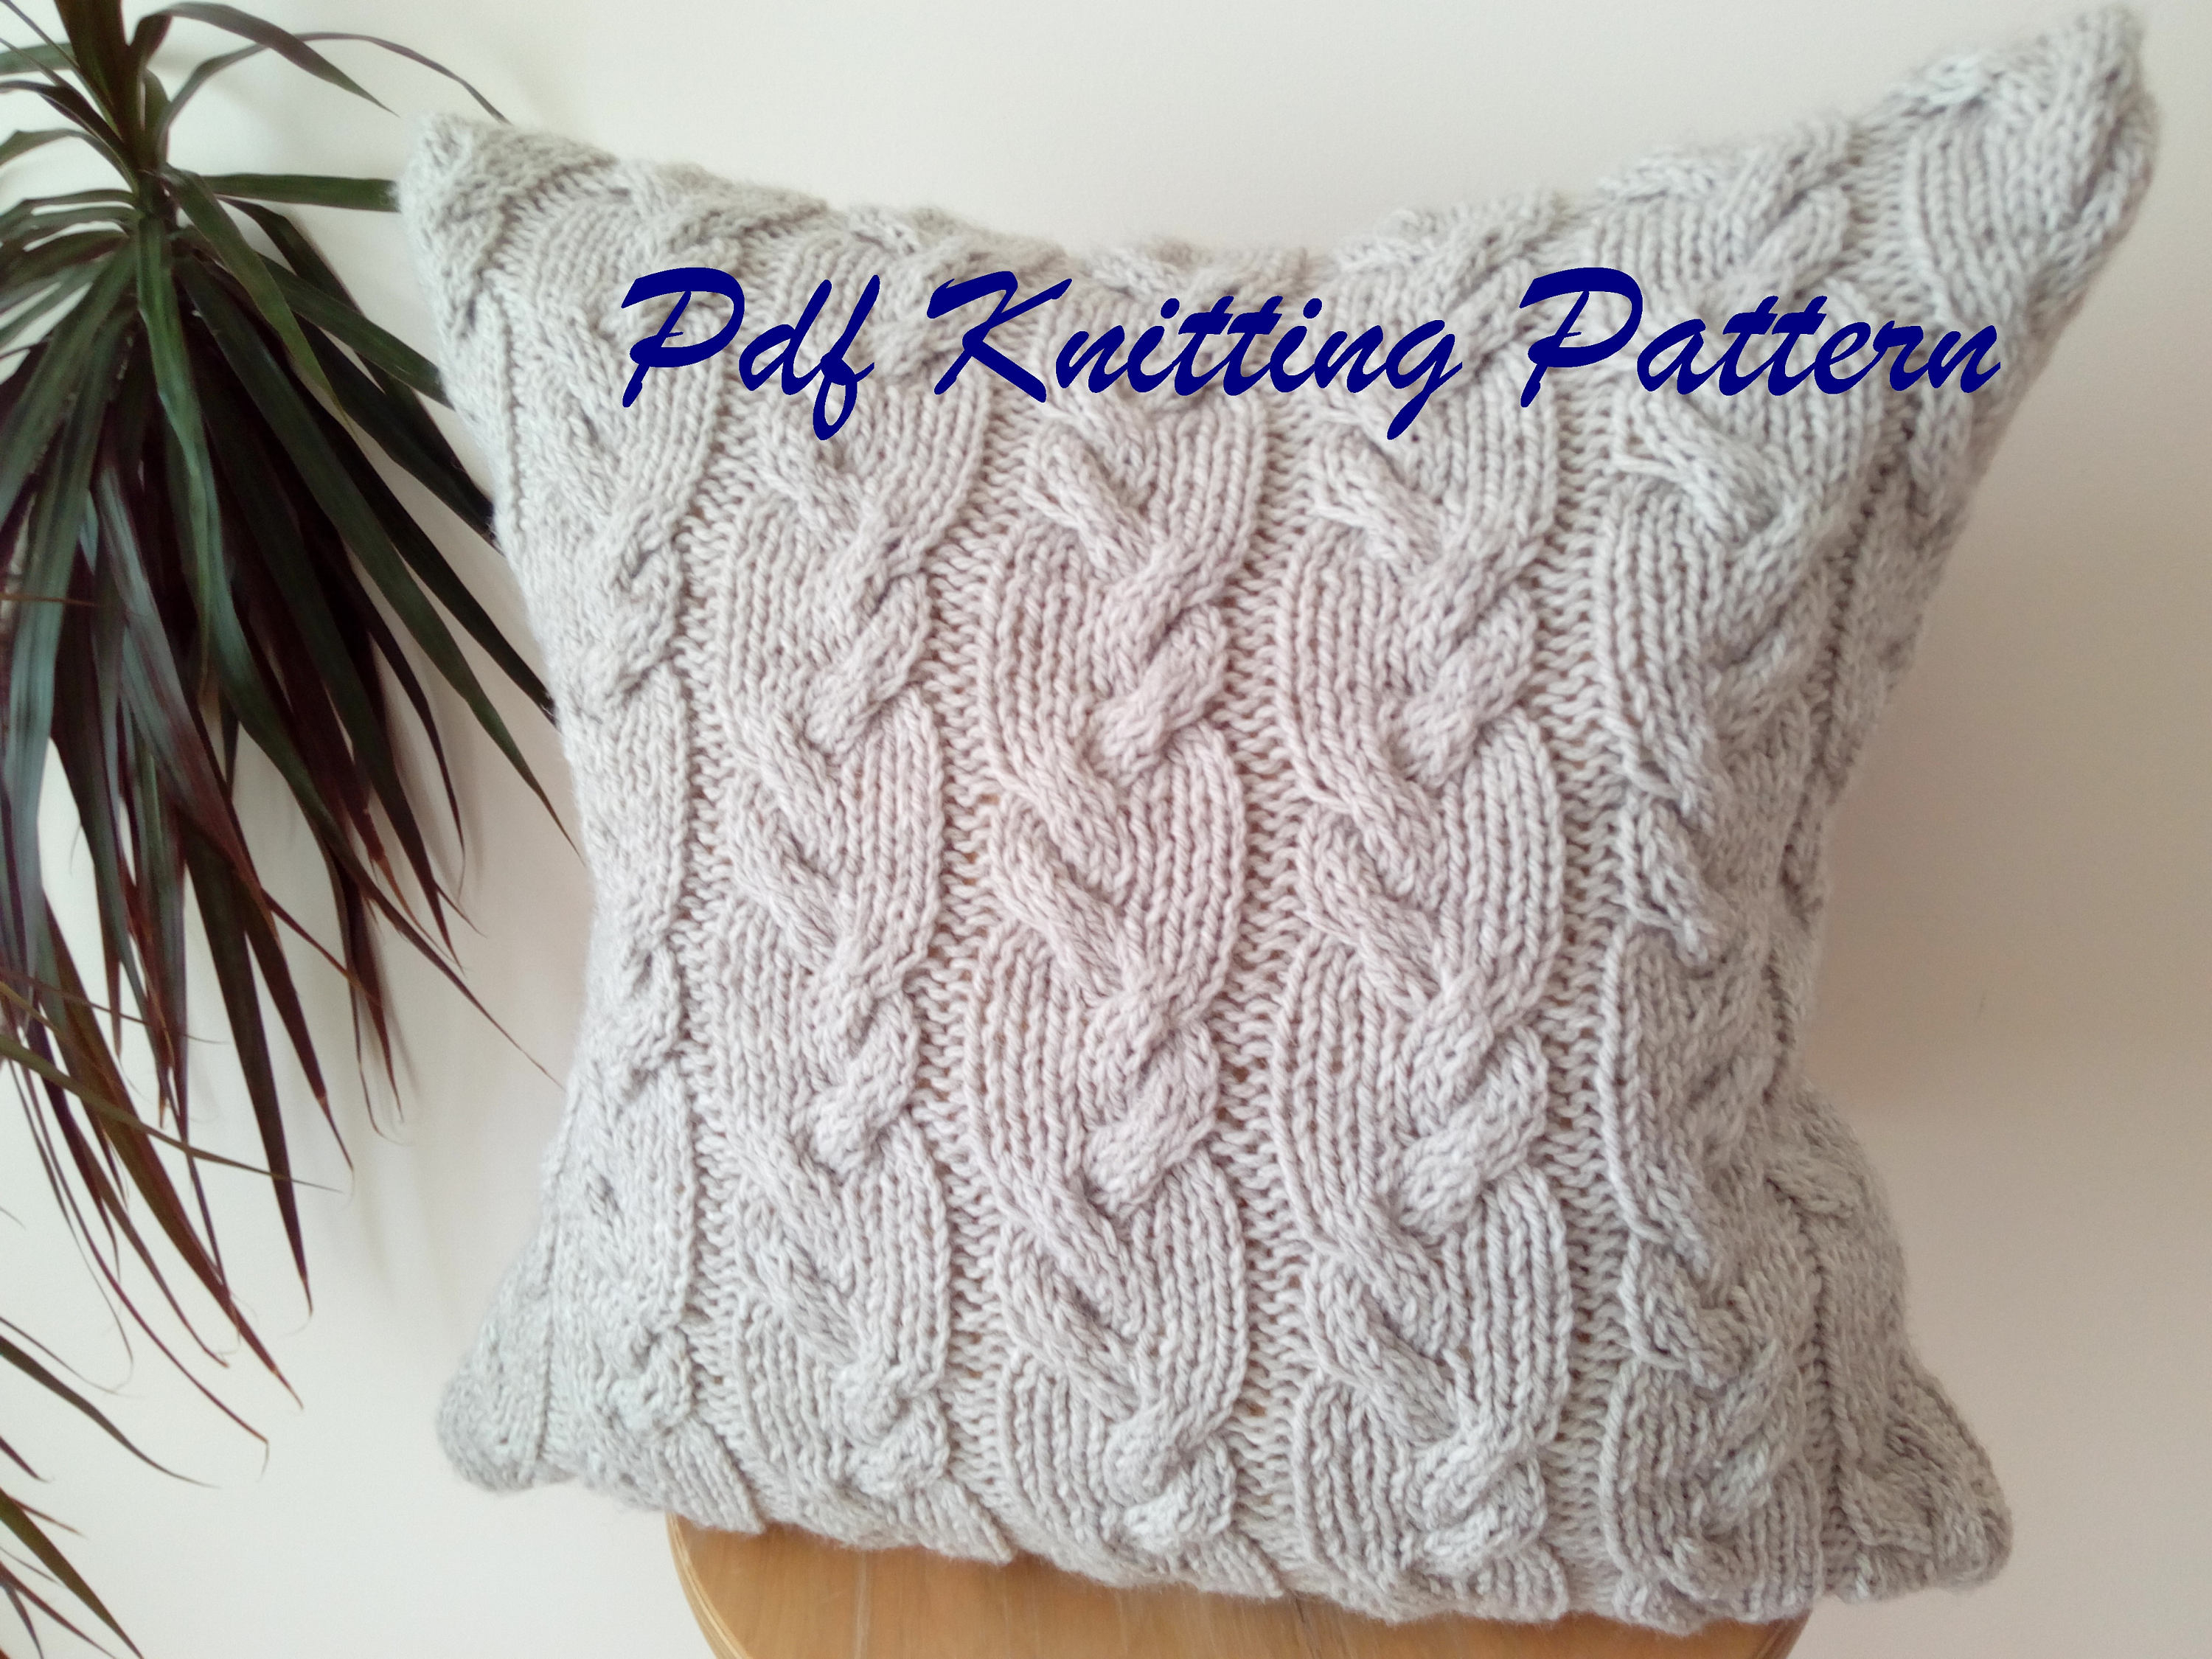 Knitting Pattern For Cushion Cover With Cables Pdf Knitting Pattern Cable Knit Aran Pillow Cushion Cover Wavy Cables 18 X 18 Button